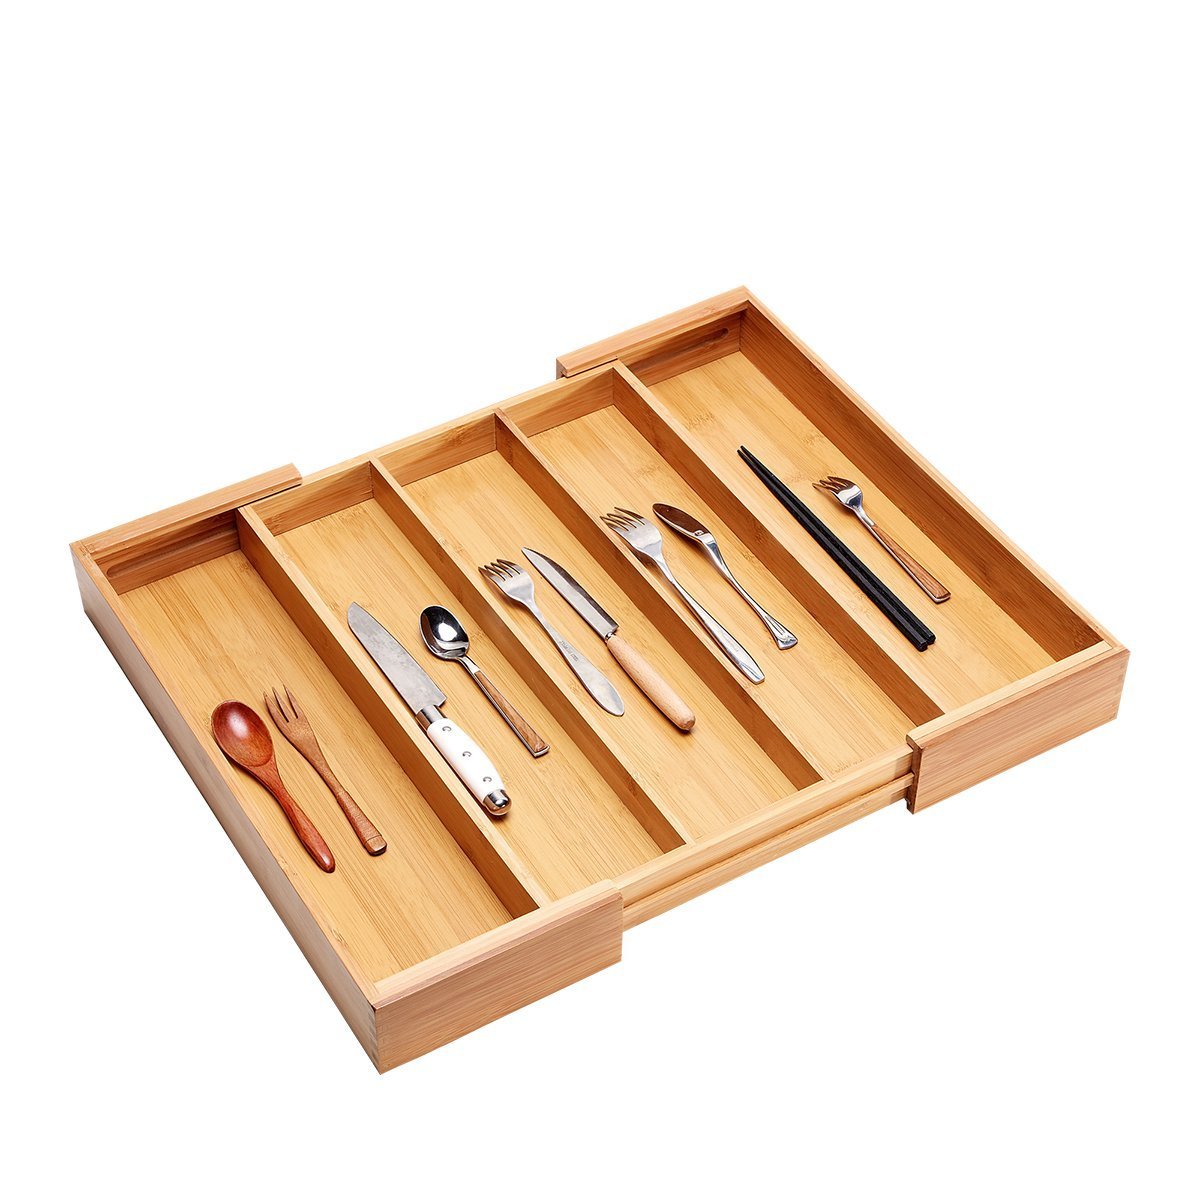 Shop here bamboo expandable utensil cutlery tray drawer organizer divider 3 compartments with 2 adjustable dimensions beautiful durable and multifunctional utensil holder and organizer